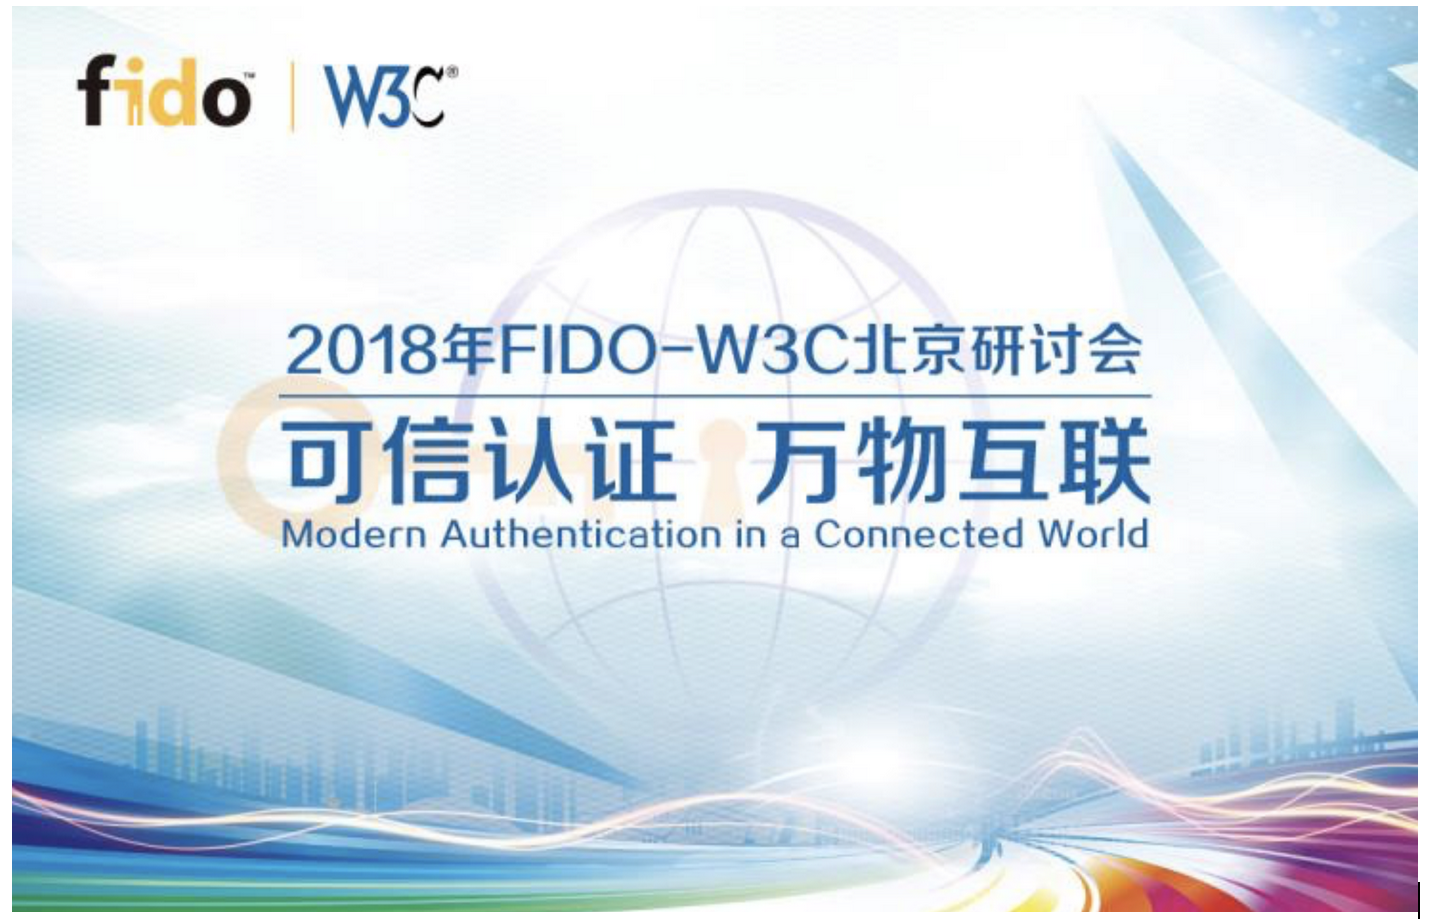 image of the fido-w3c co-event in Beijing